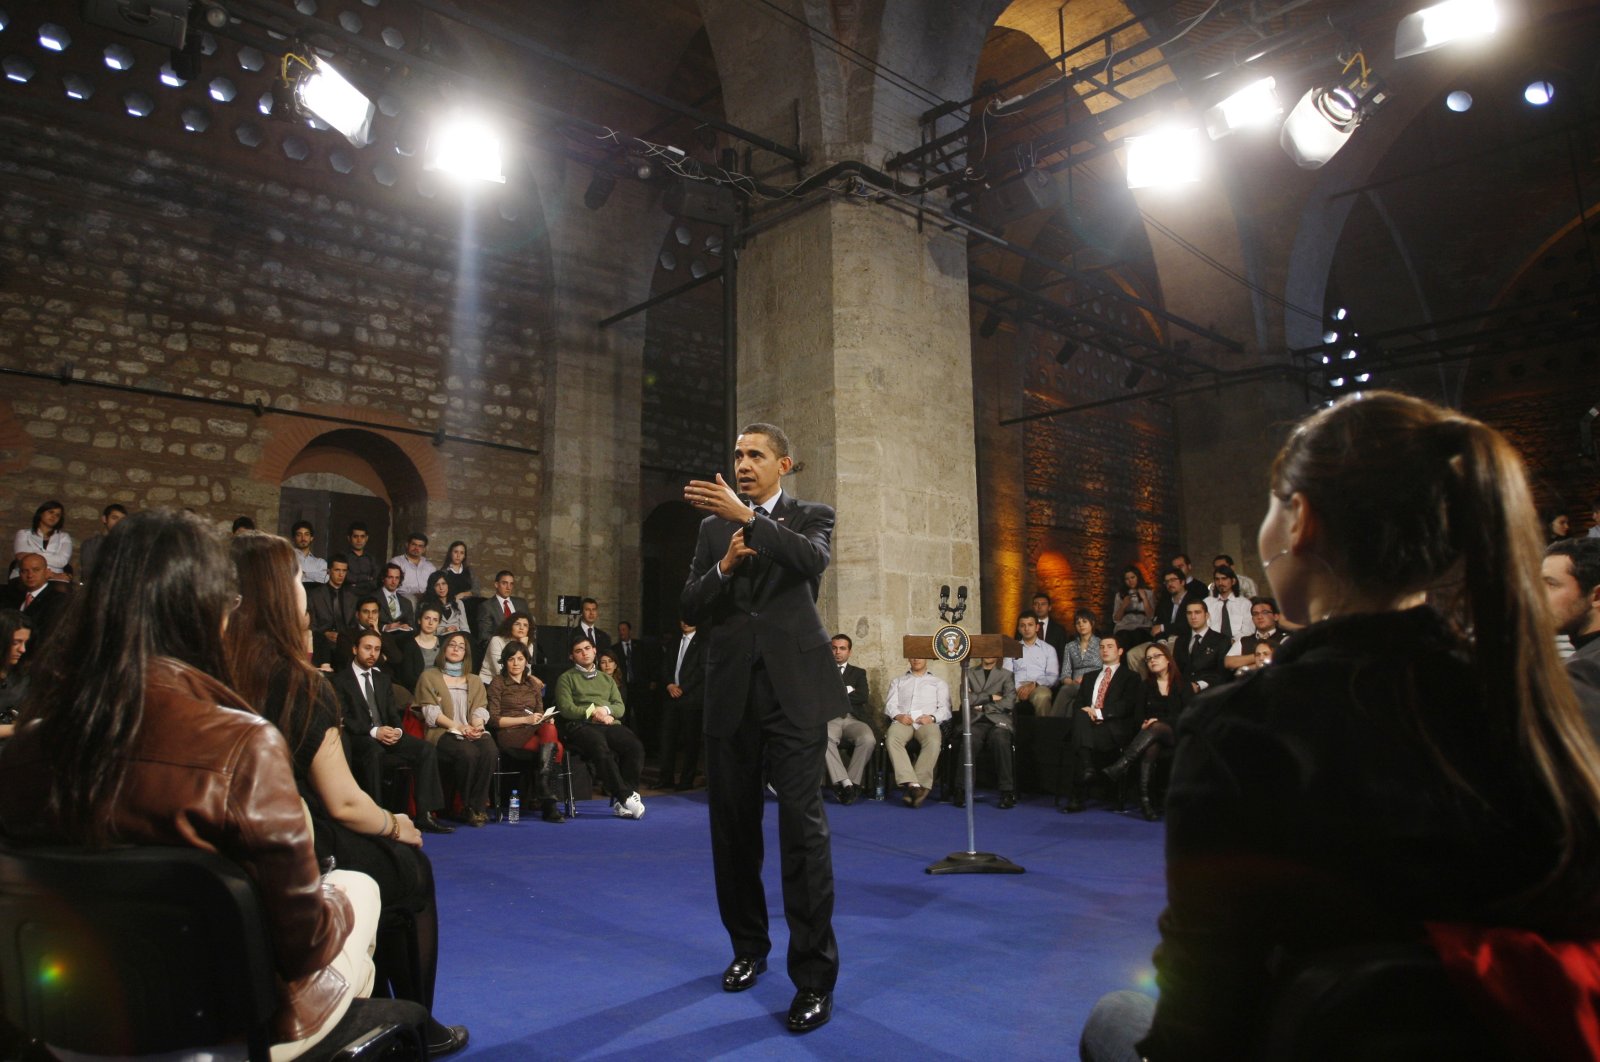 Then-U.S. President Barack Obama participates in a town hall meeting with university students at the Tophane Cultural Center in Istanbul, Turkey, April 7, 2009. (Reuters Photo)